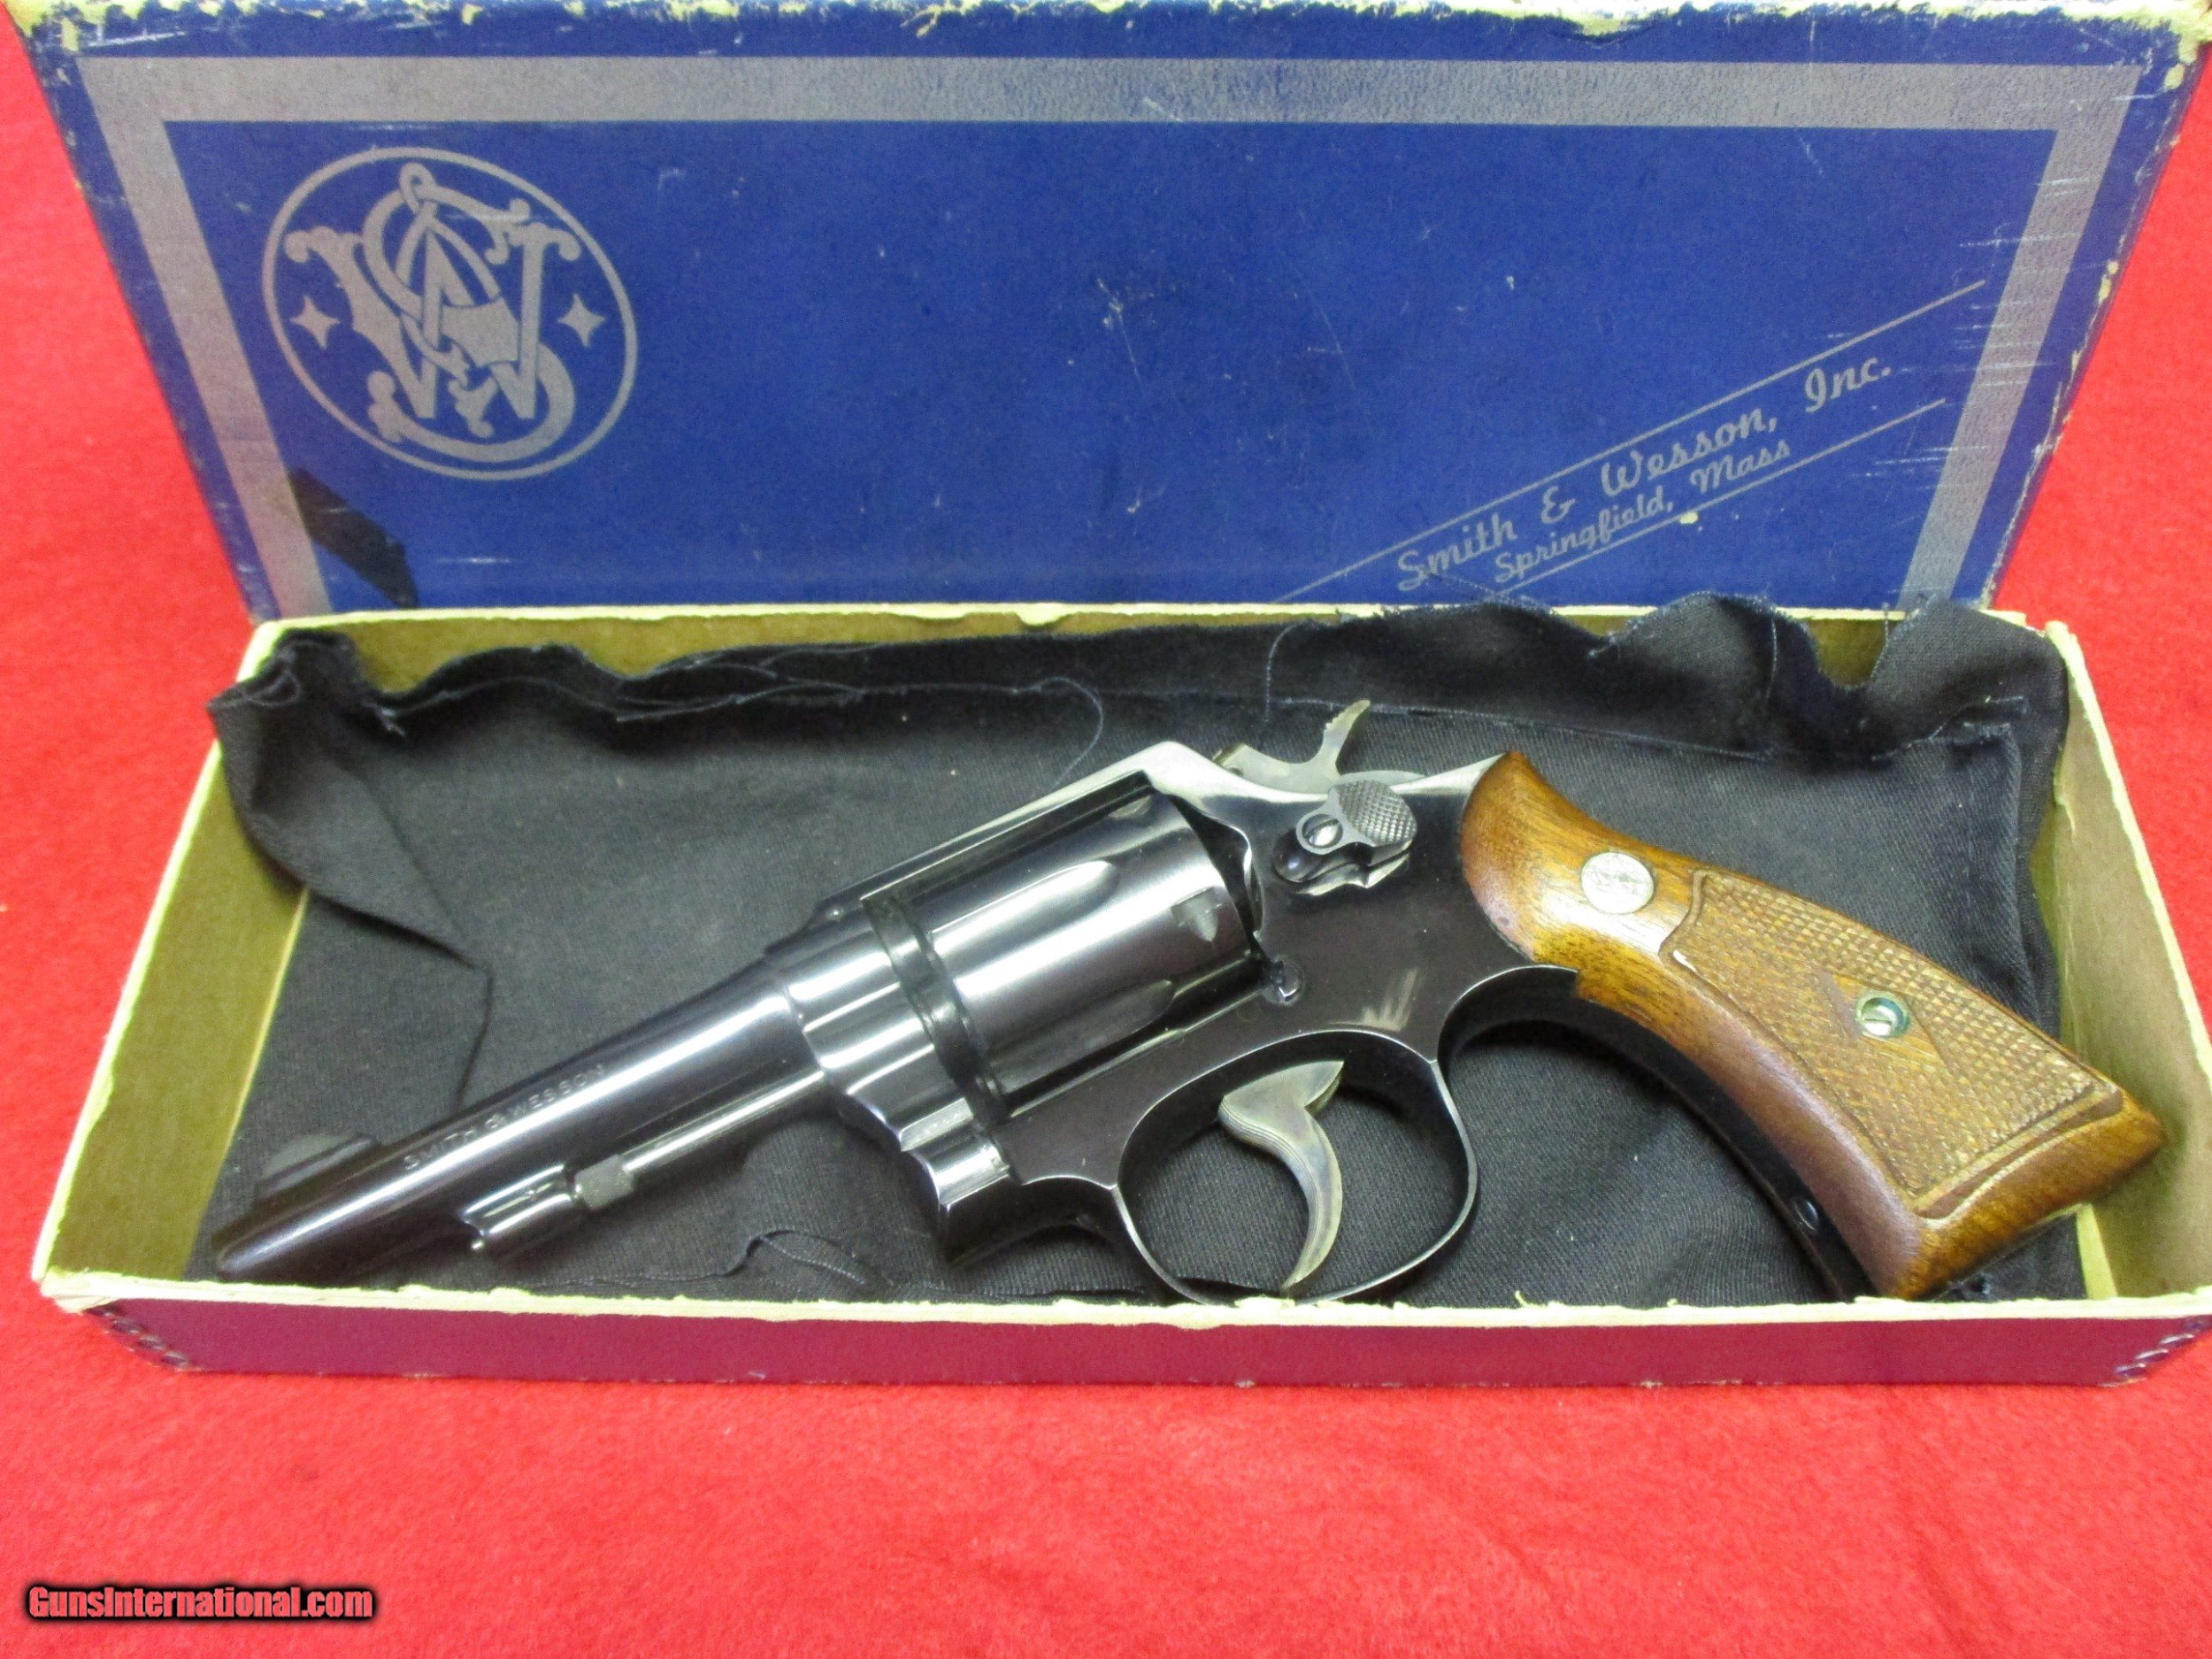 Dating Smith en Wesson Model 10